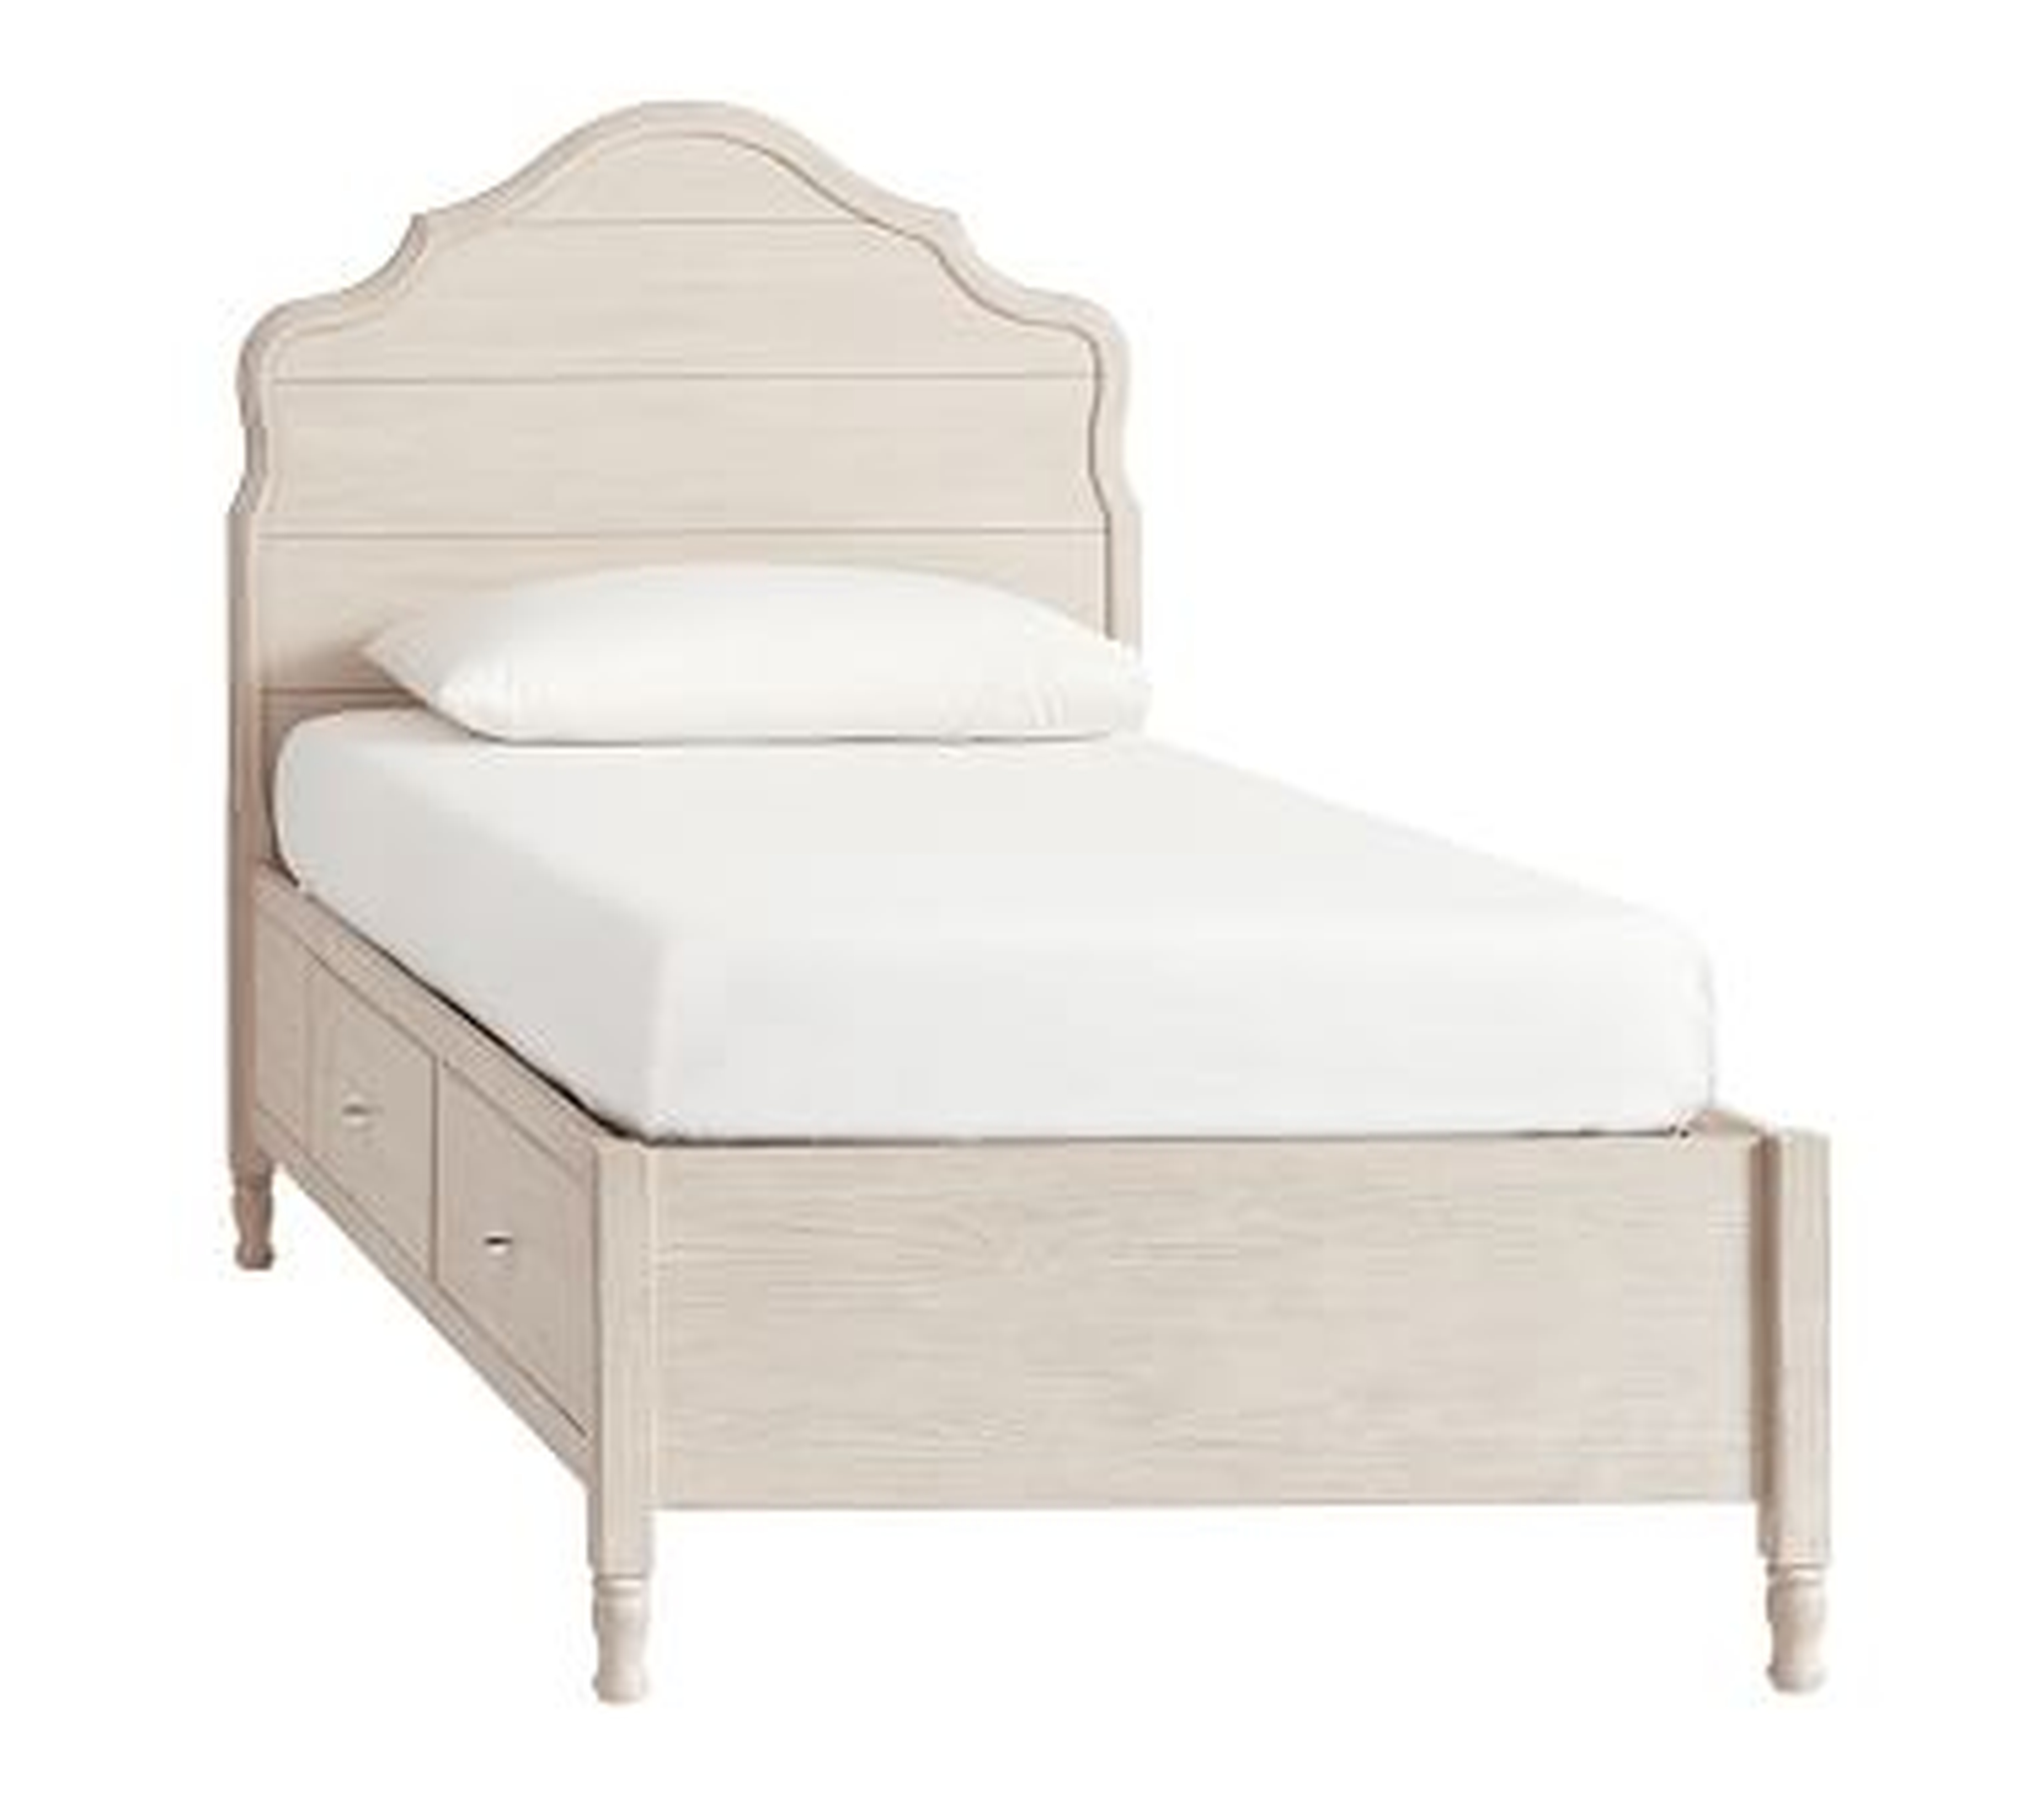 Juliette Storage Bed, Full, Weathered White, Flat Rate - Pottery Barn Kids